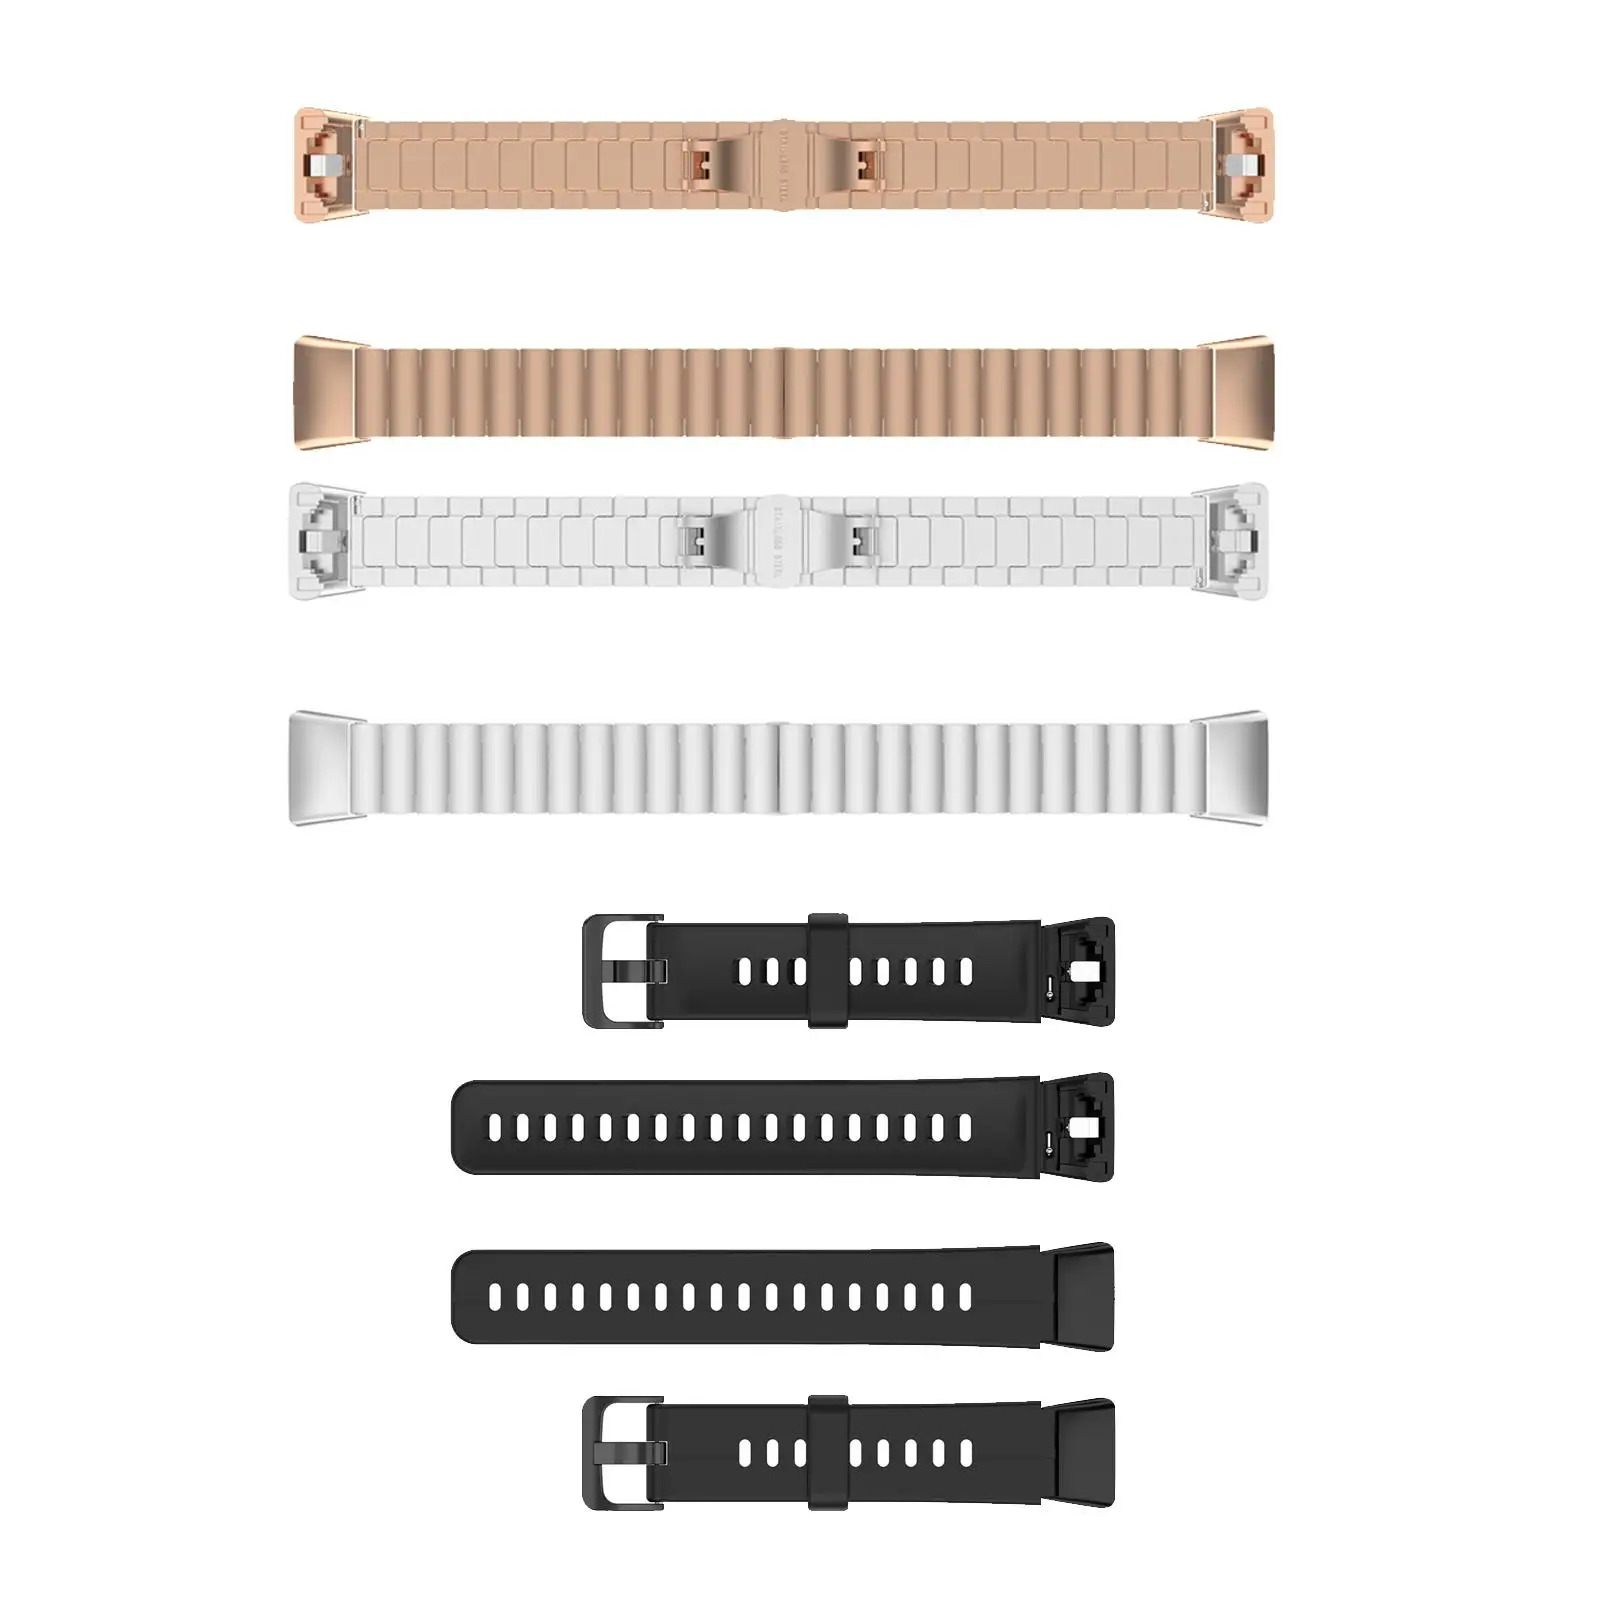 1Pair Watch Strap Connector Watch Band Adapter Repair Tool Accessories Replacement for  Band 6 for Honor Band 6 16mm